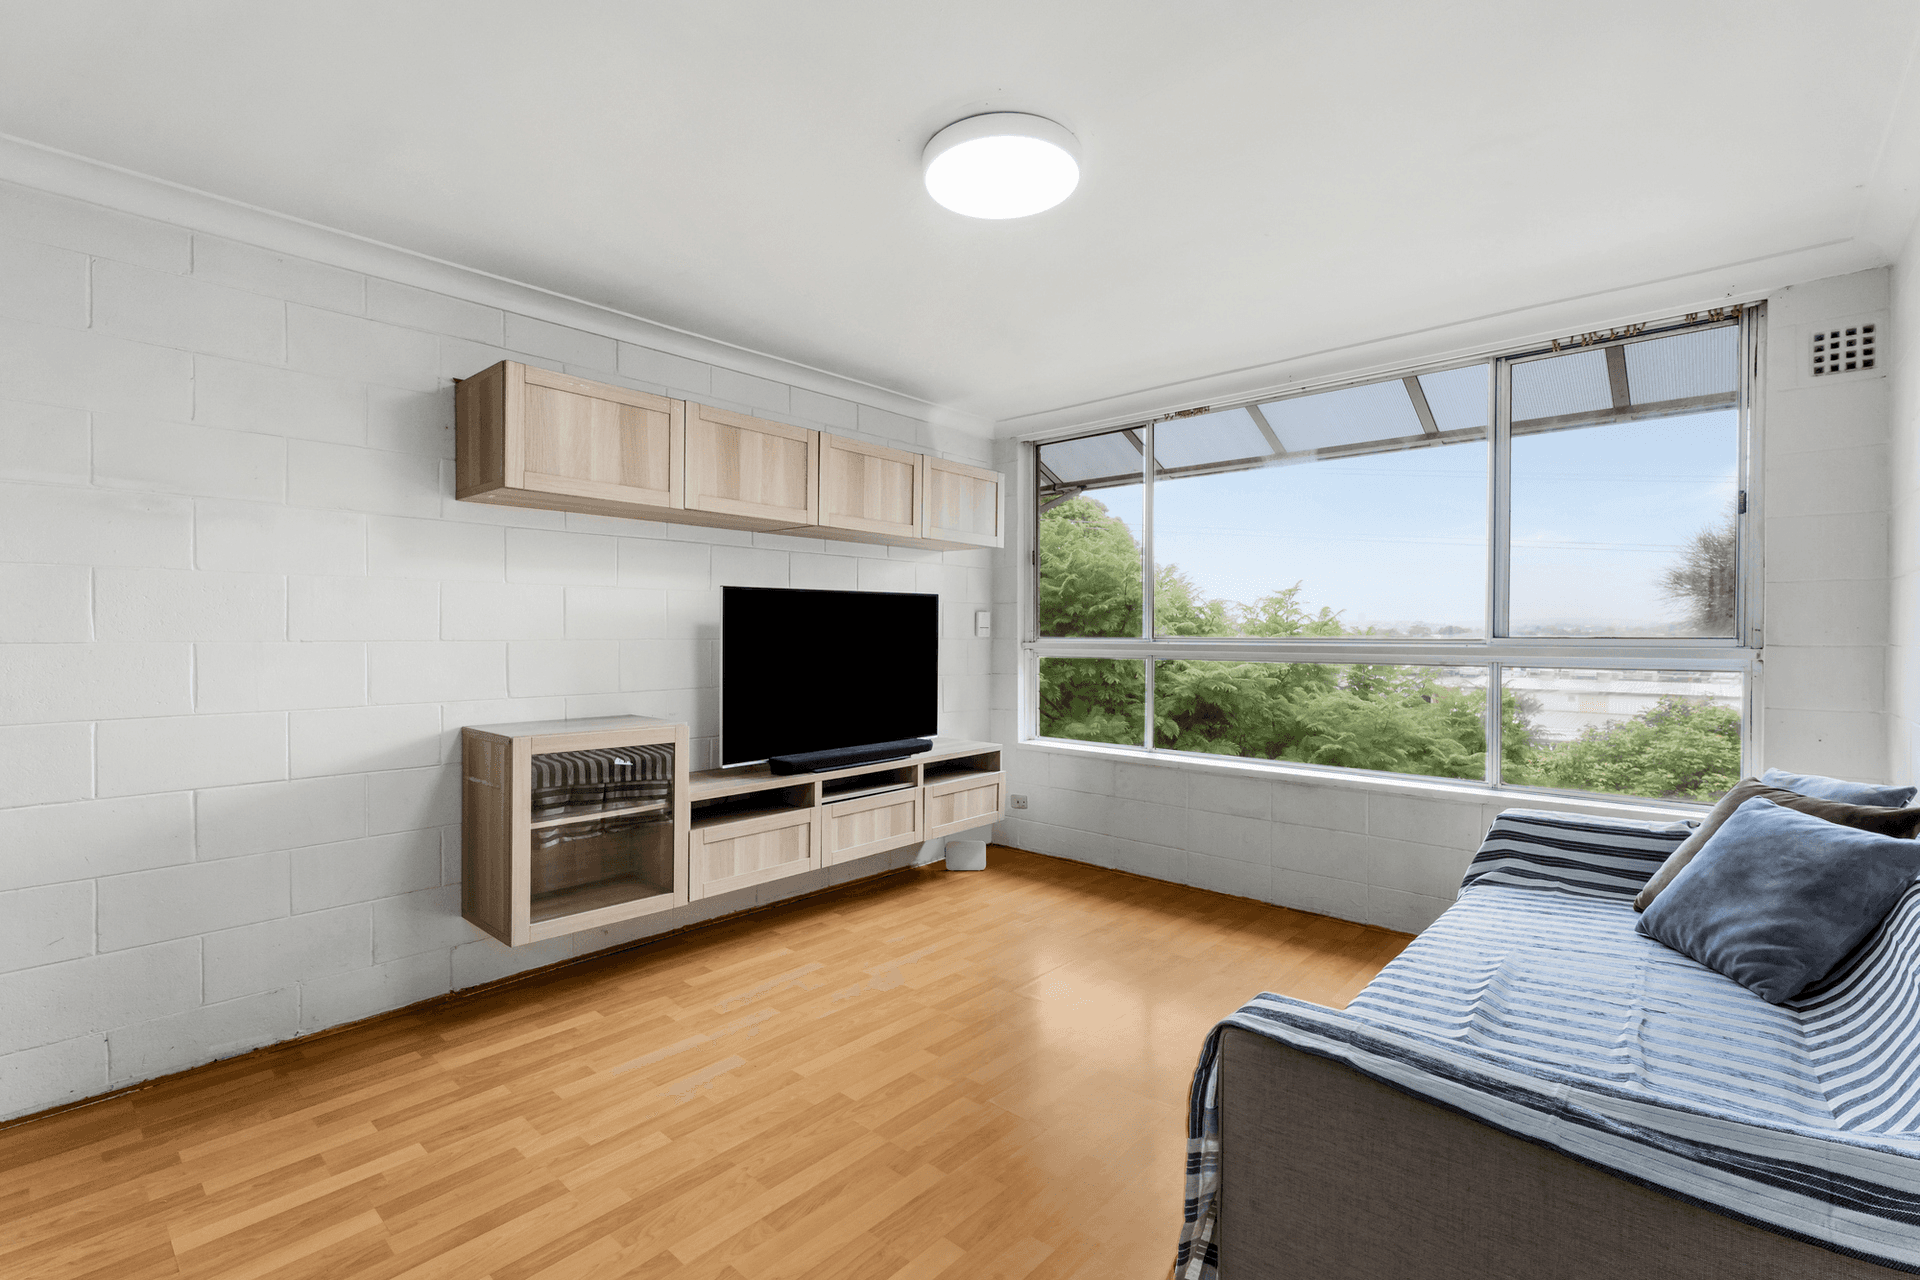 3/18 Old Pittwater Road, Brookvale, NSW 2100